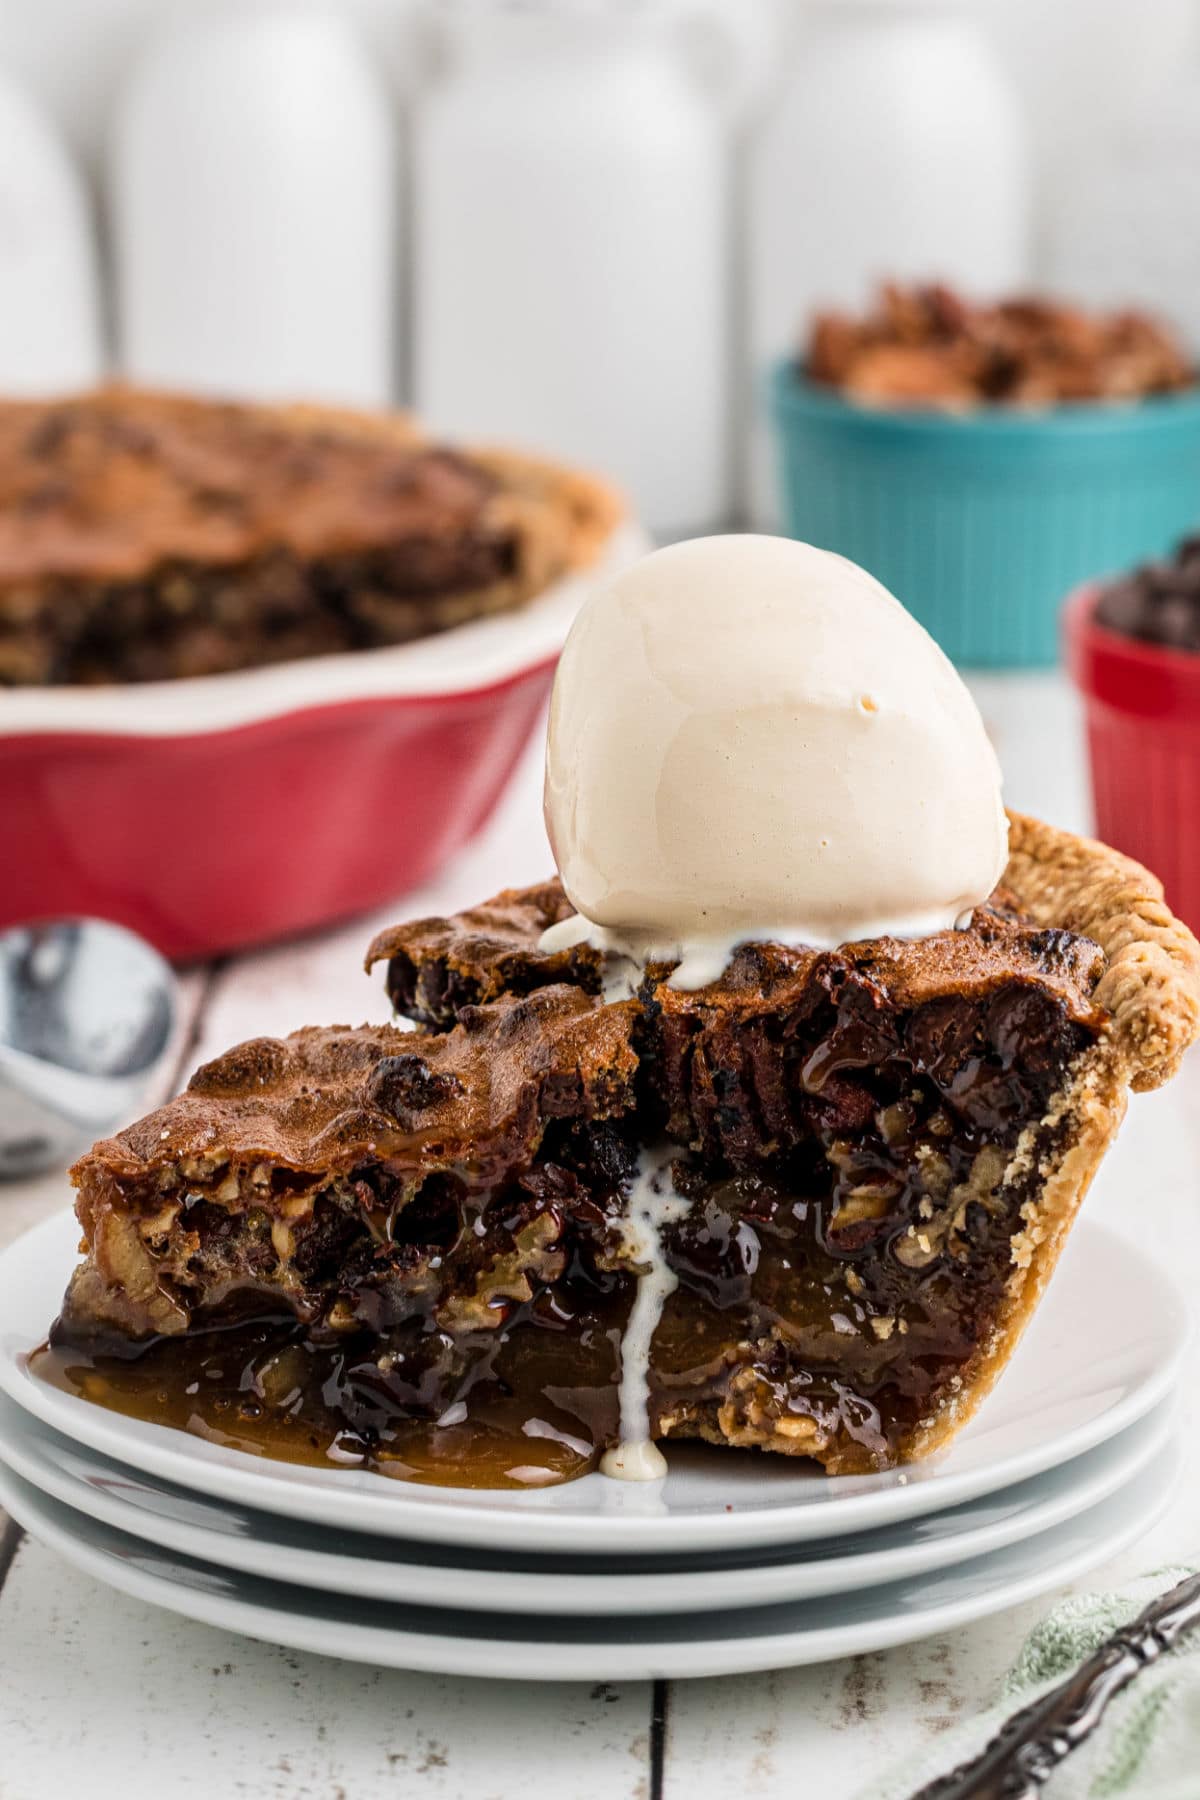 A slice of chocolate bourbon pecan pie on a plate with a shiny scoop of ice cream on top. The angle of the photo highlights the gooey, chocolate interior of the pie which runs a little onto the plate.